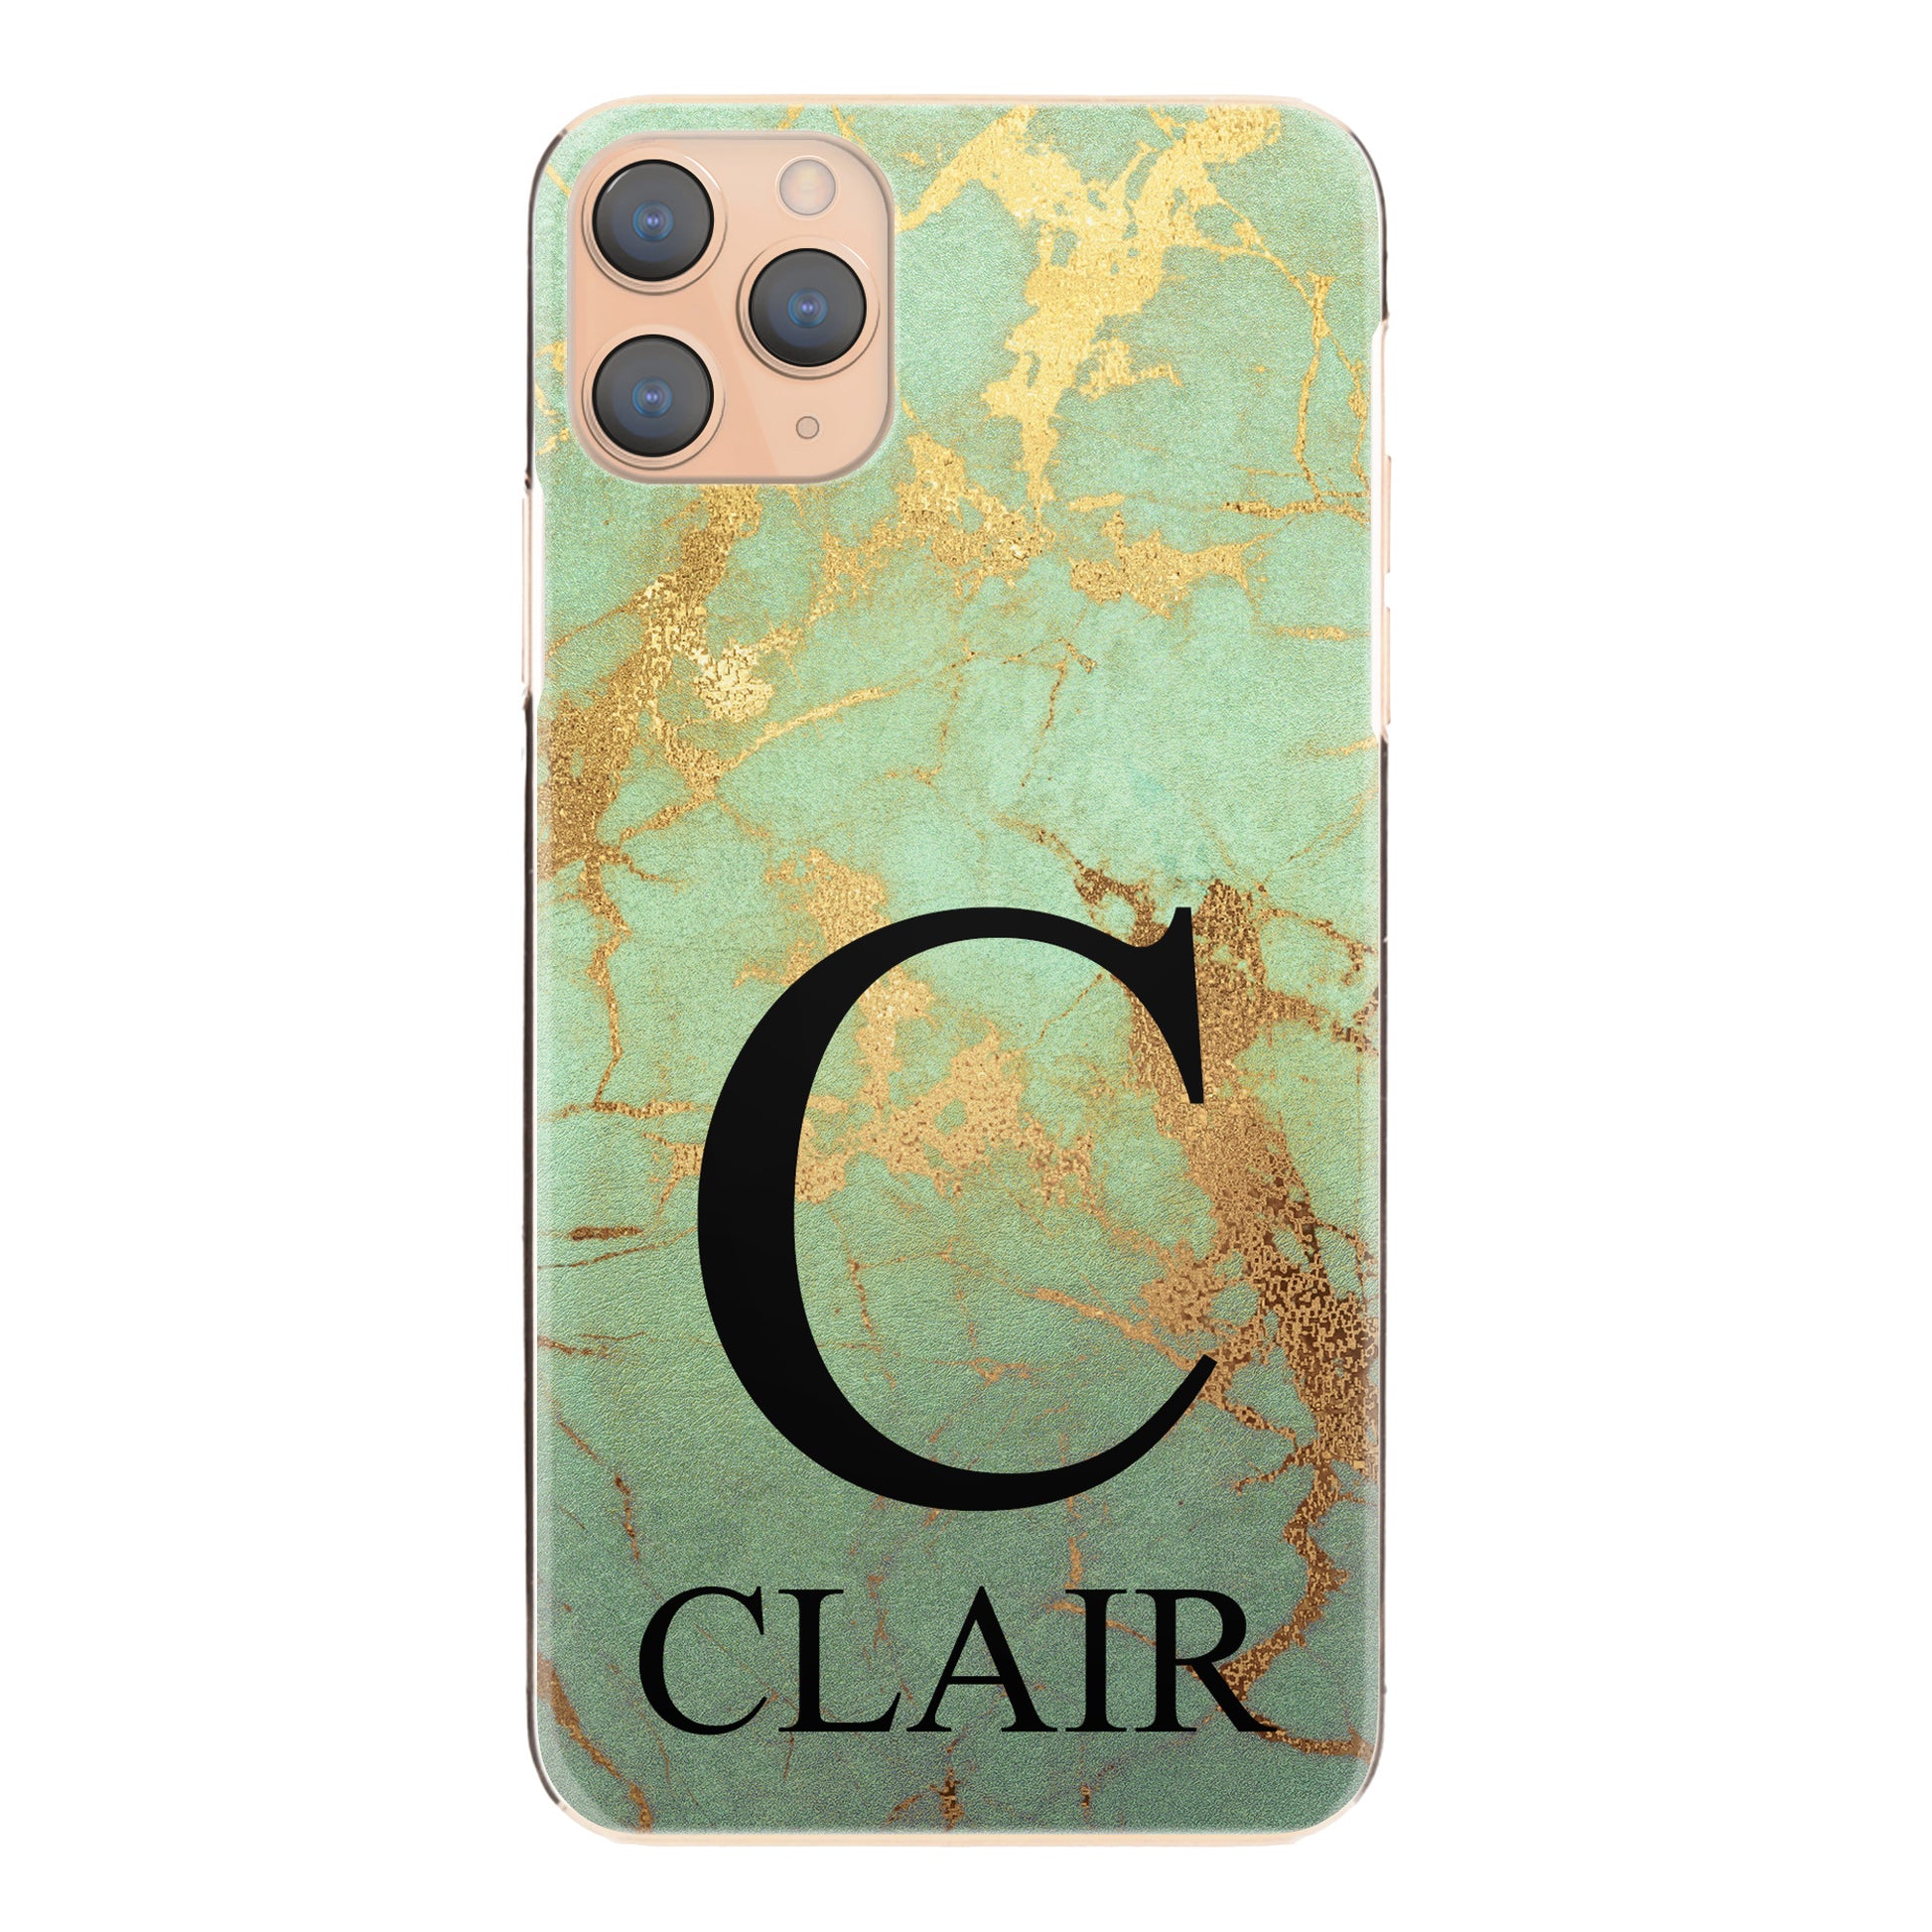 Personalised HTC Phone Hard Case with Monogram and Text on Gold Infused Green Marble